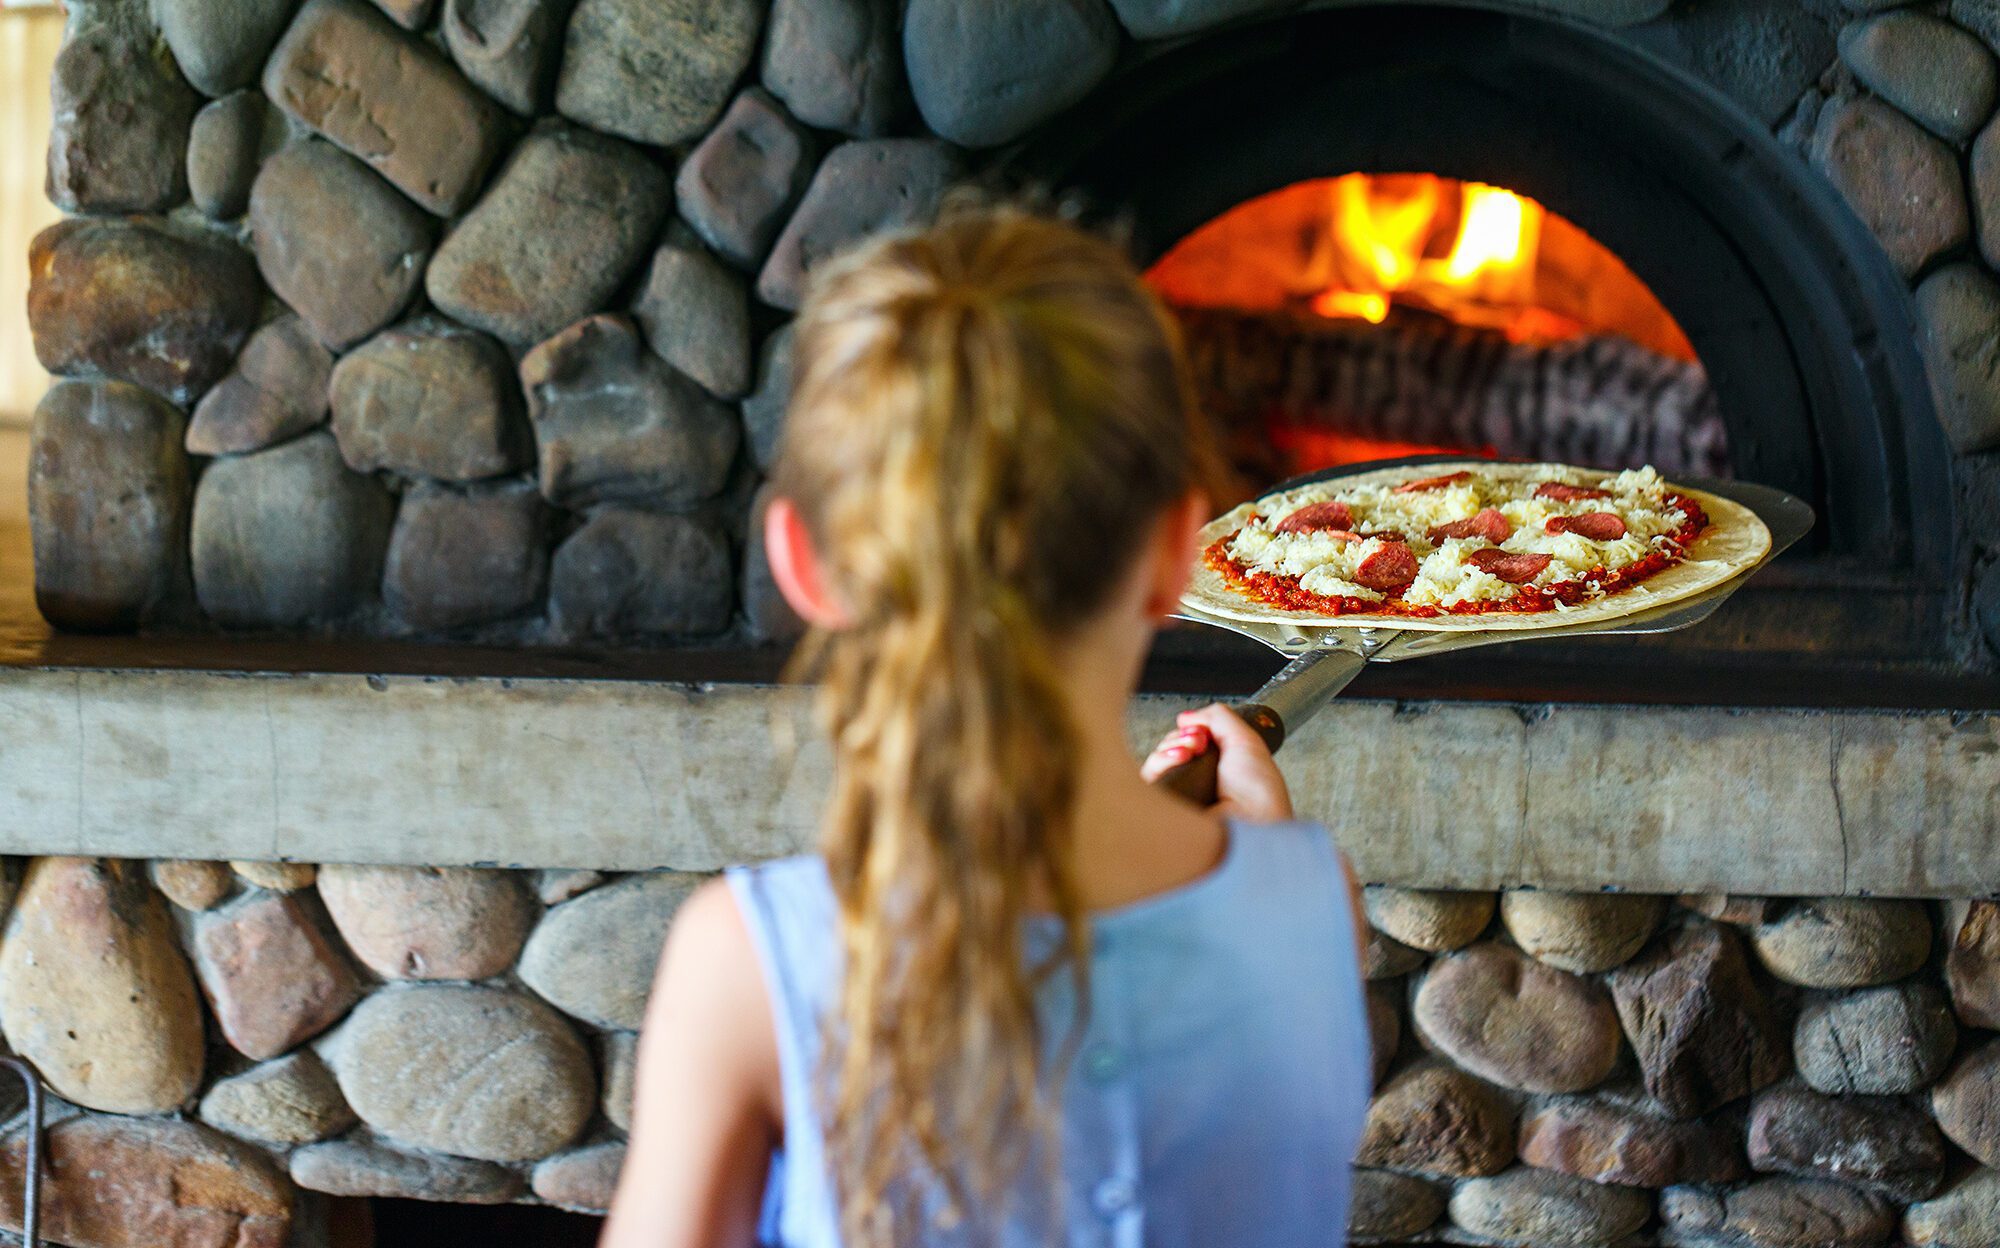 Young girl putting pizza into an outdoor pizza oven